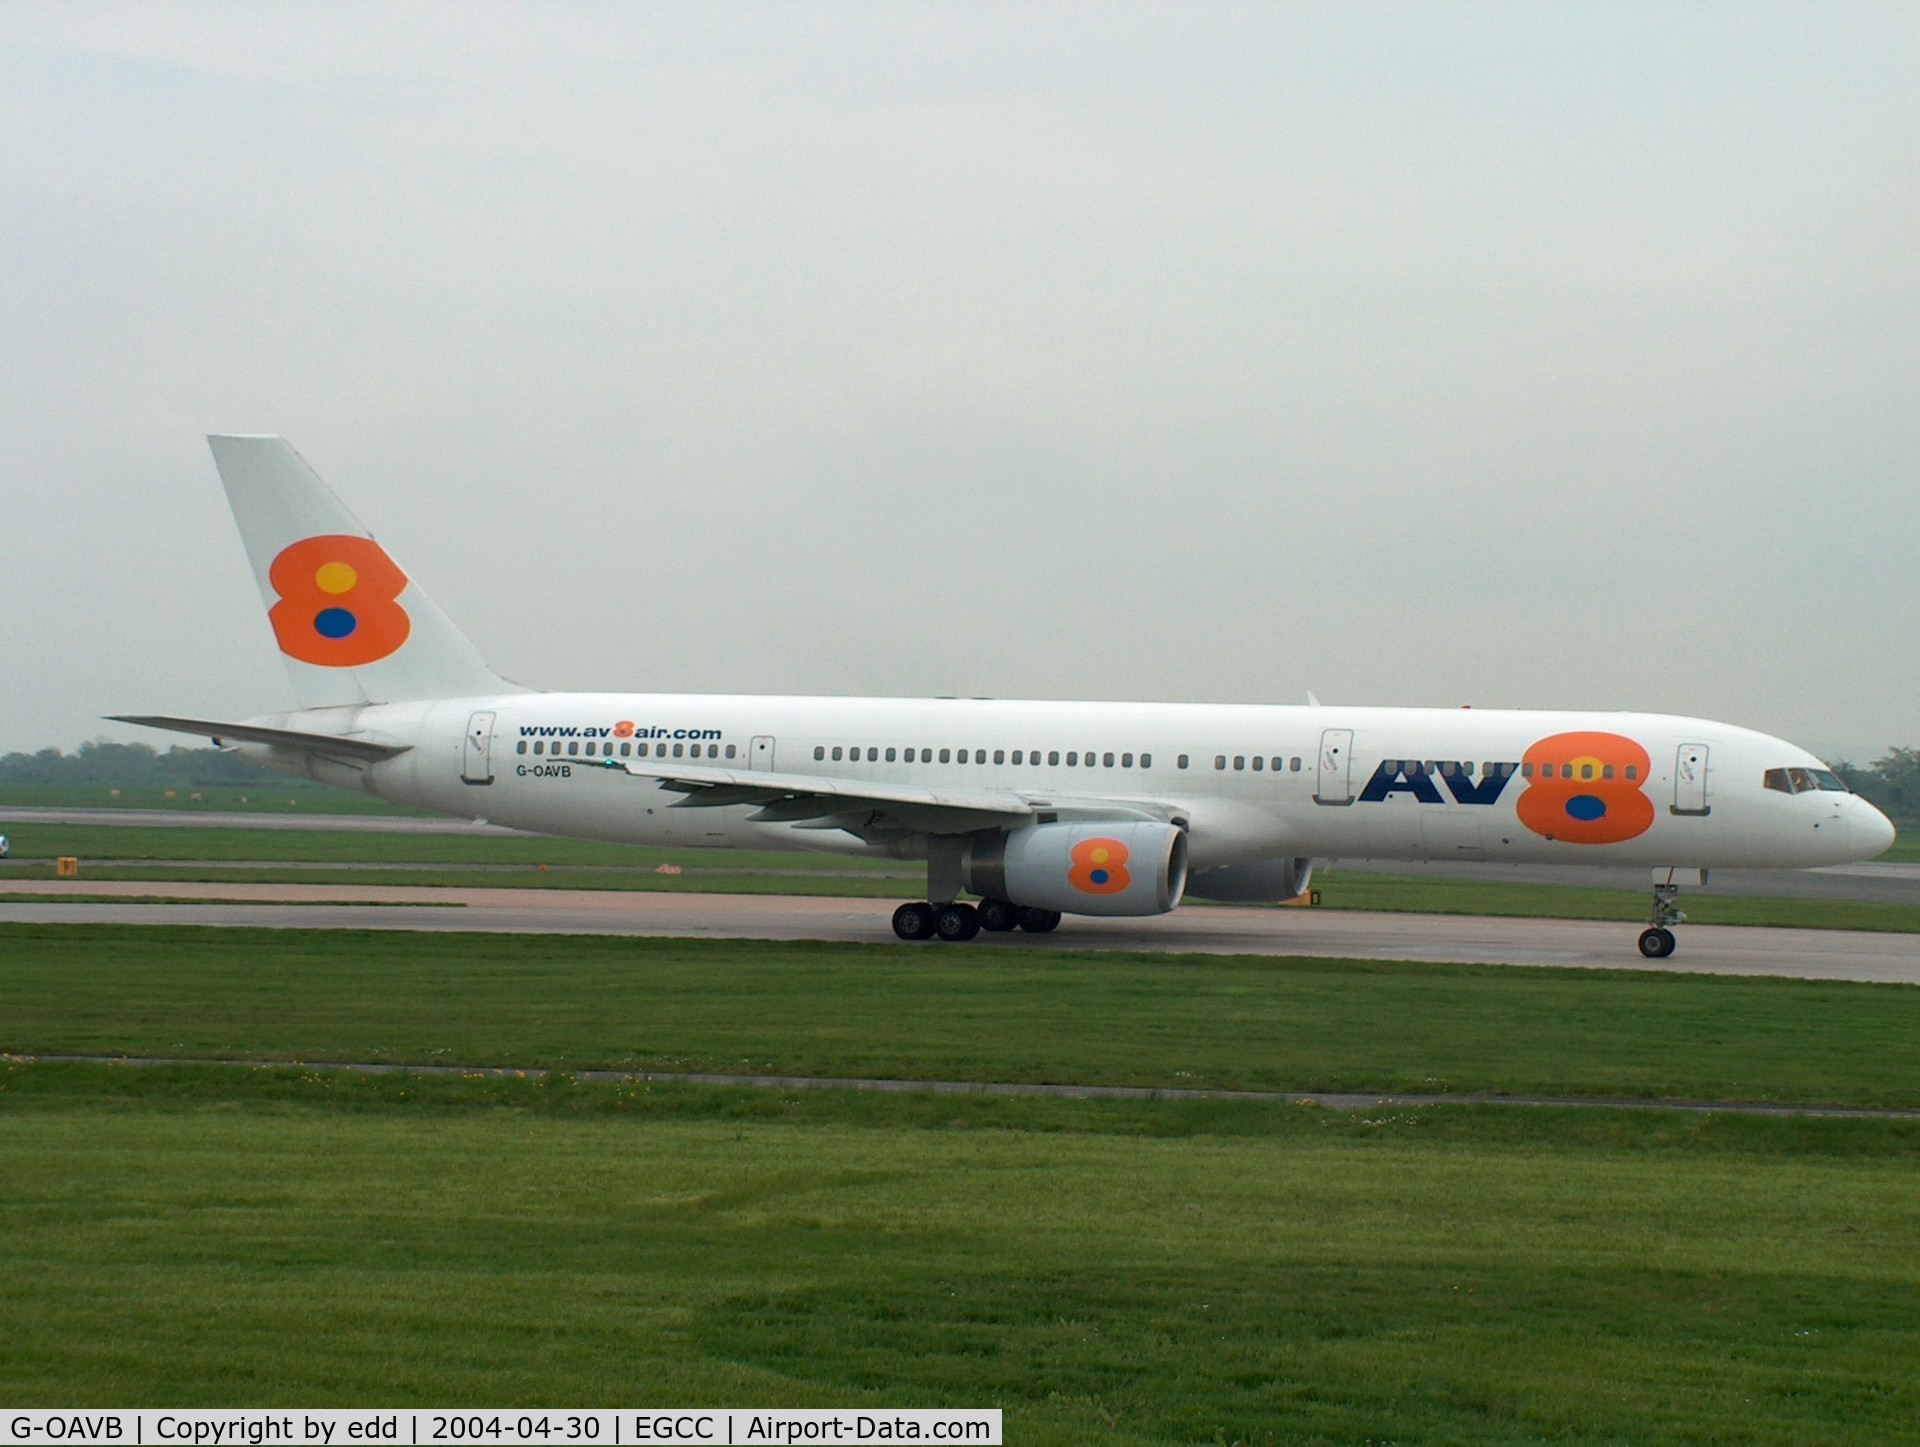 G-OAVB, 1988 Boeing 757-23A C/N 24289, V8 Airlines excisted only one season